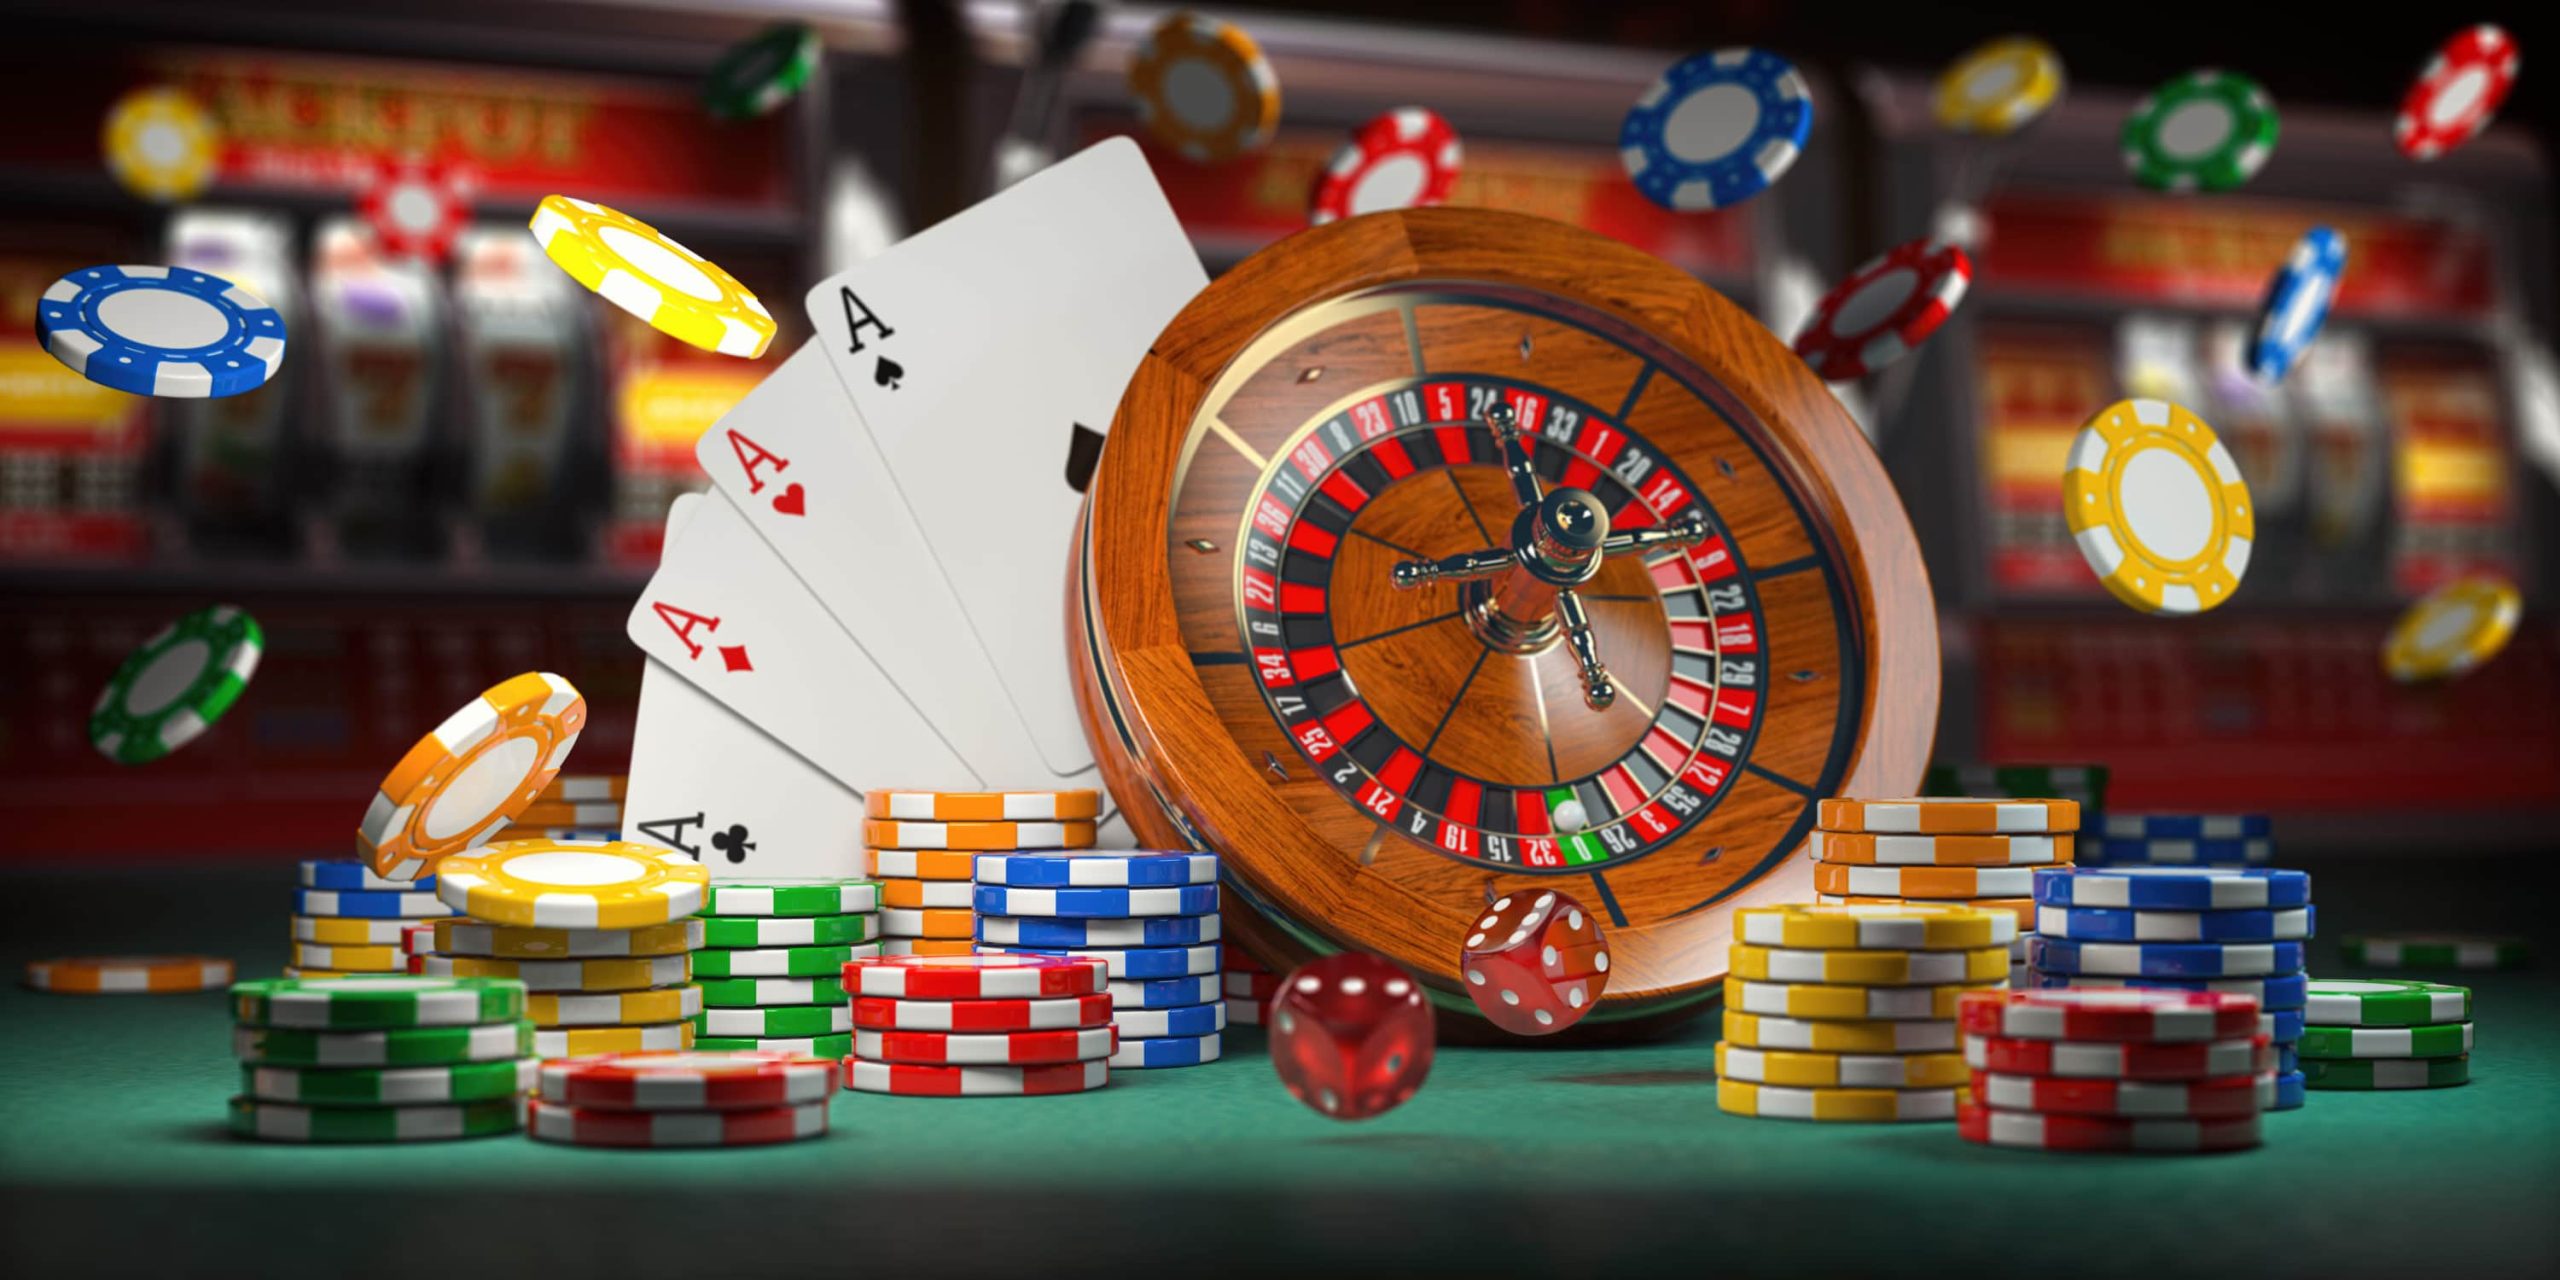 Use These Casino Game Practice Routines to Increase Your Odds